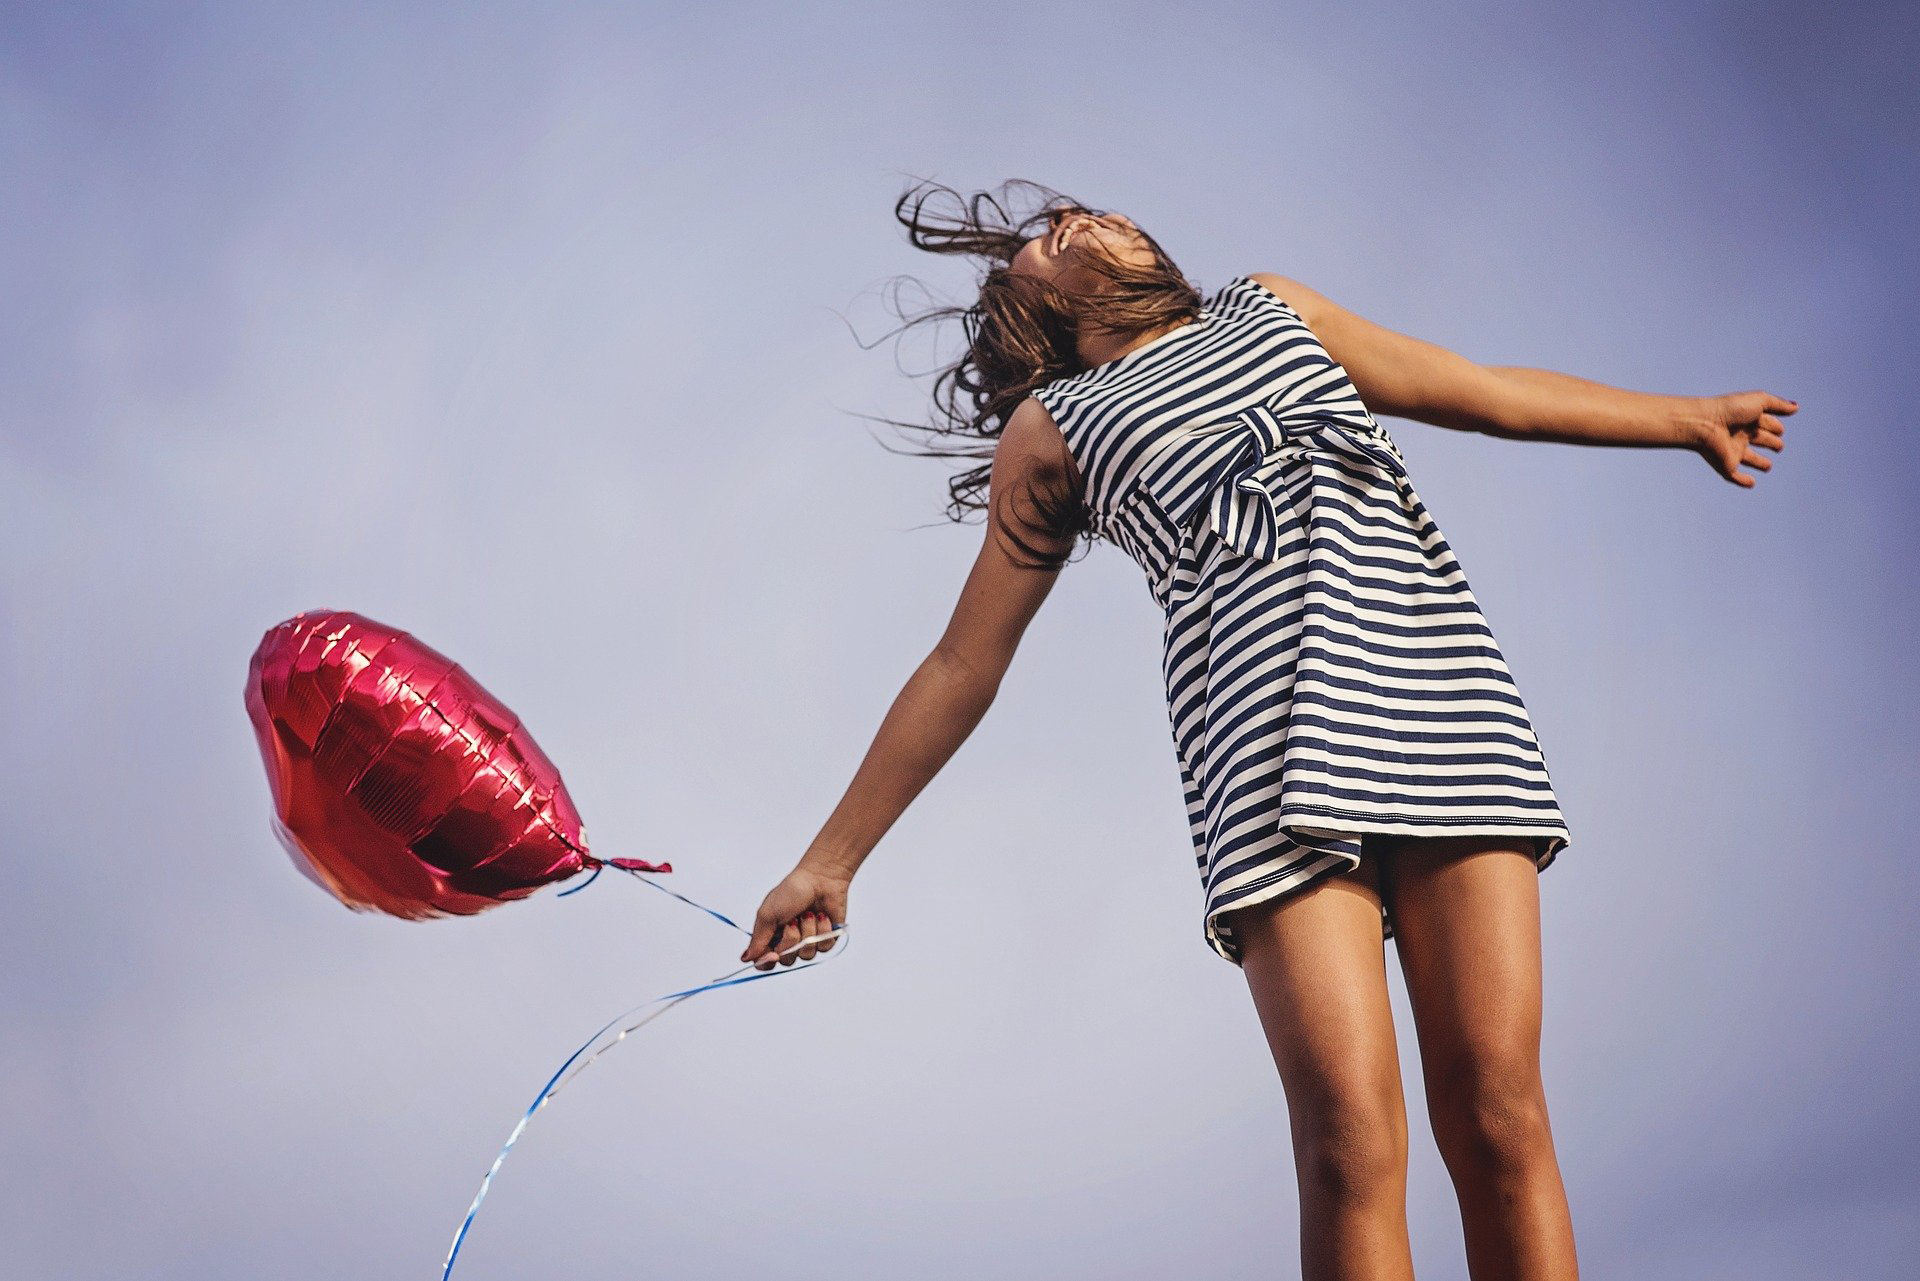 Junges Mädchen mit Luftballon springt in die Luft / Young girl with balloon jumping into the air